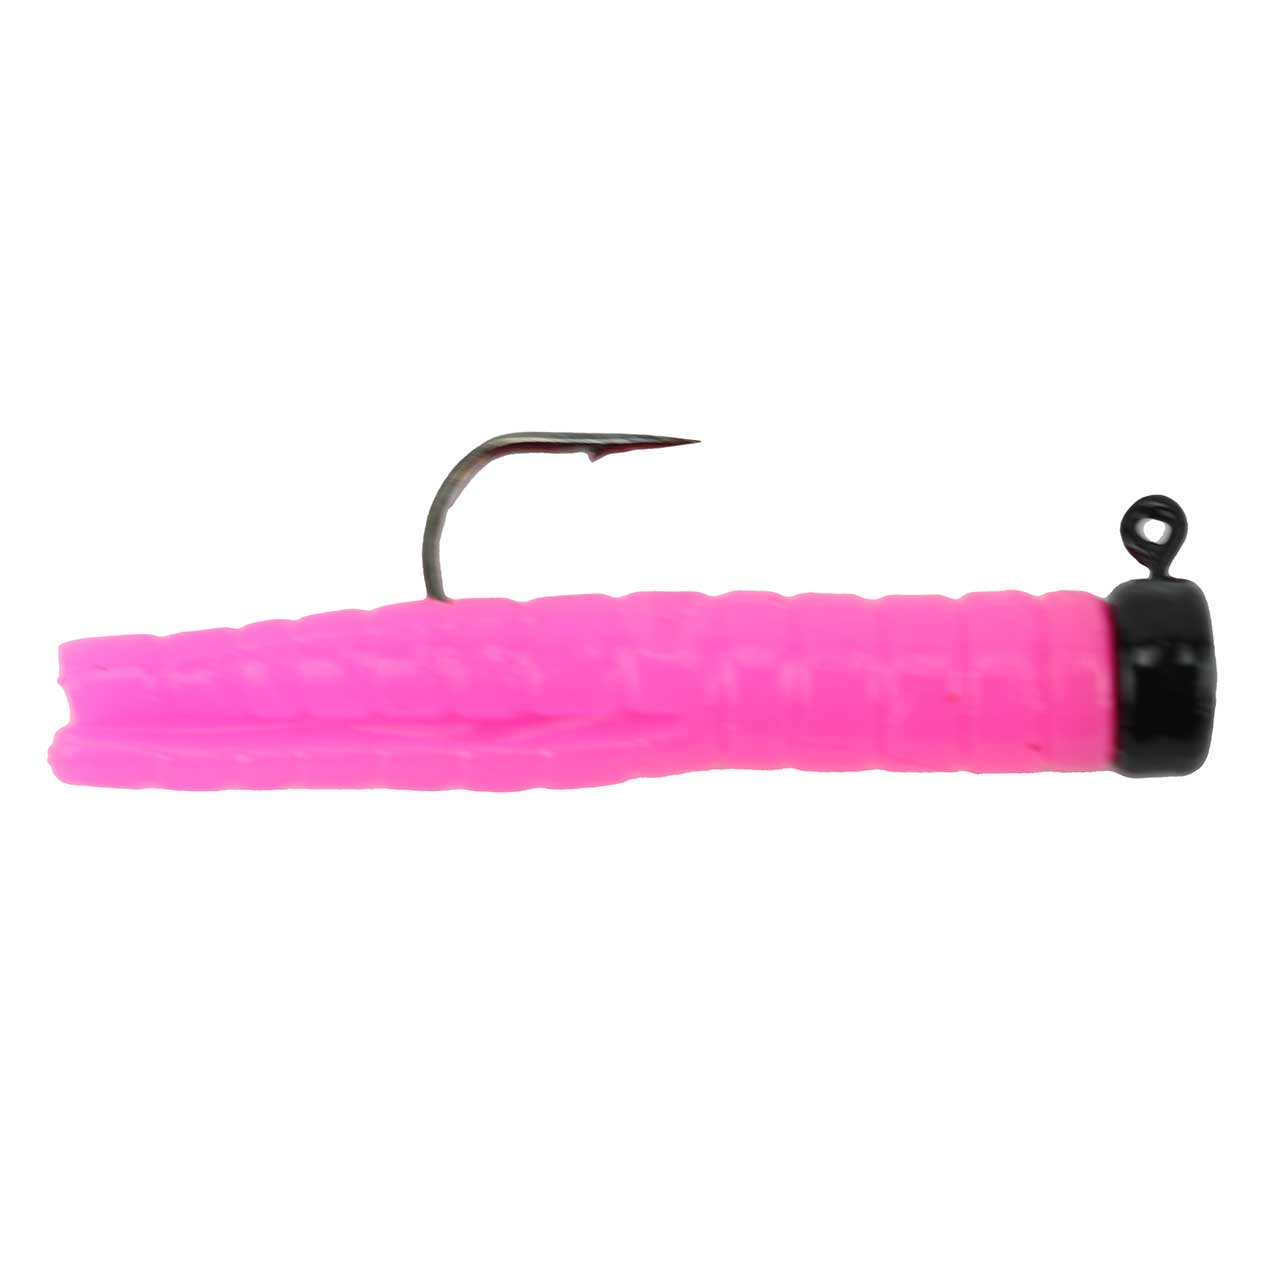 2 Packs Berkley 3 Floating Trout Worms Soft Fishing Bait Pink Shad Color